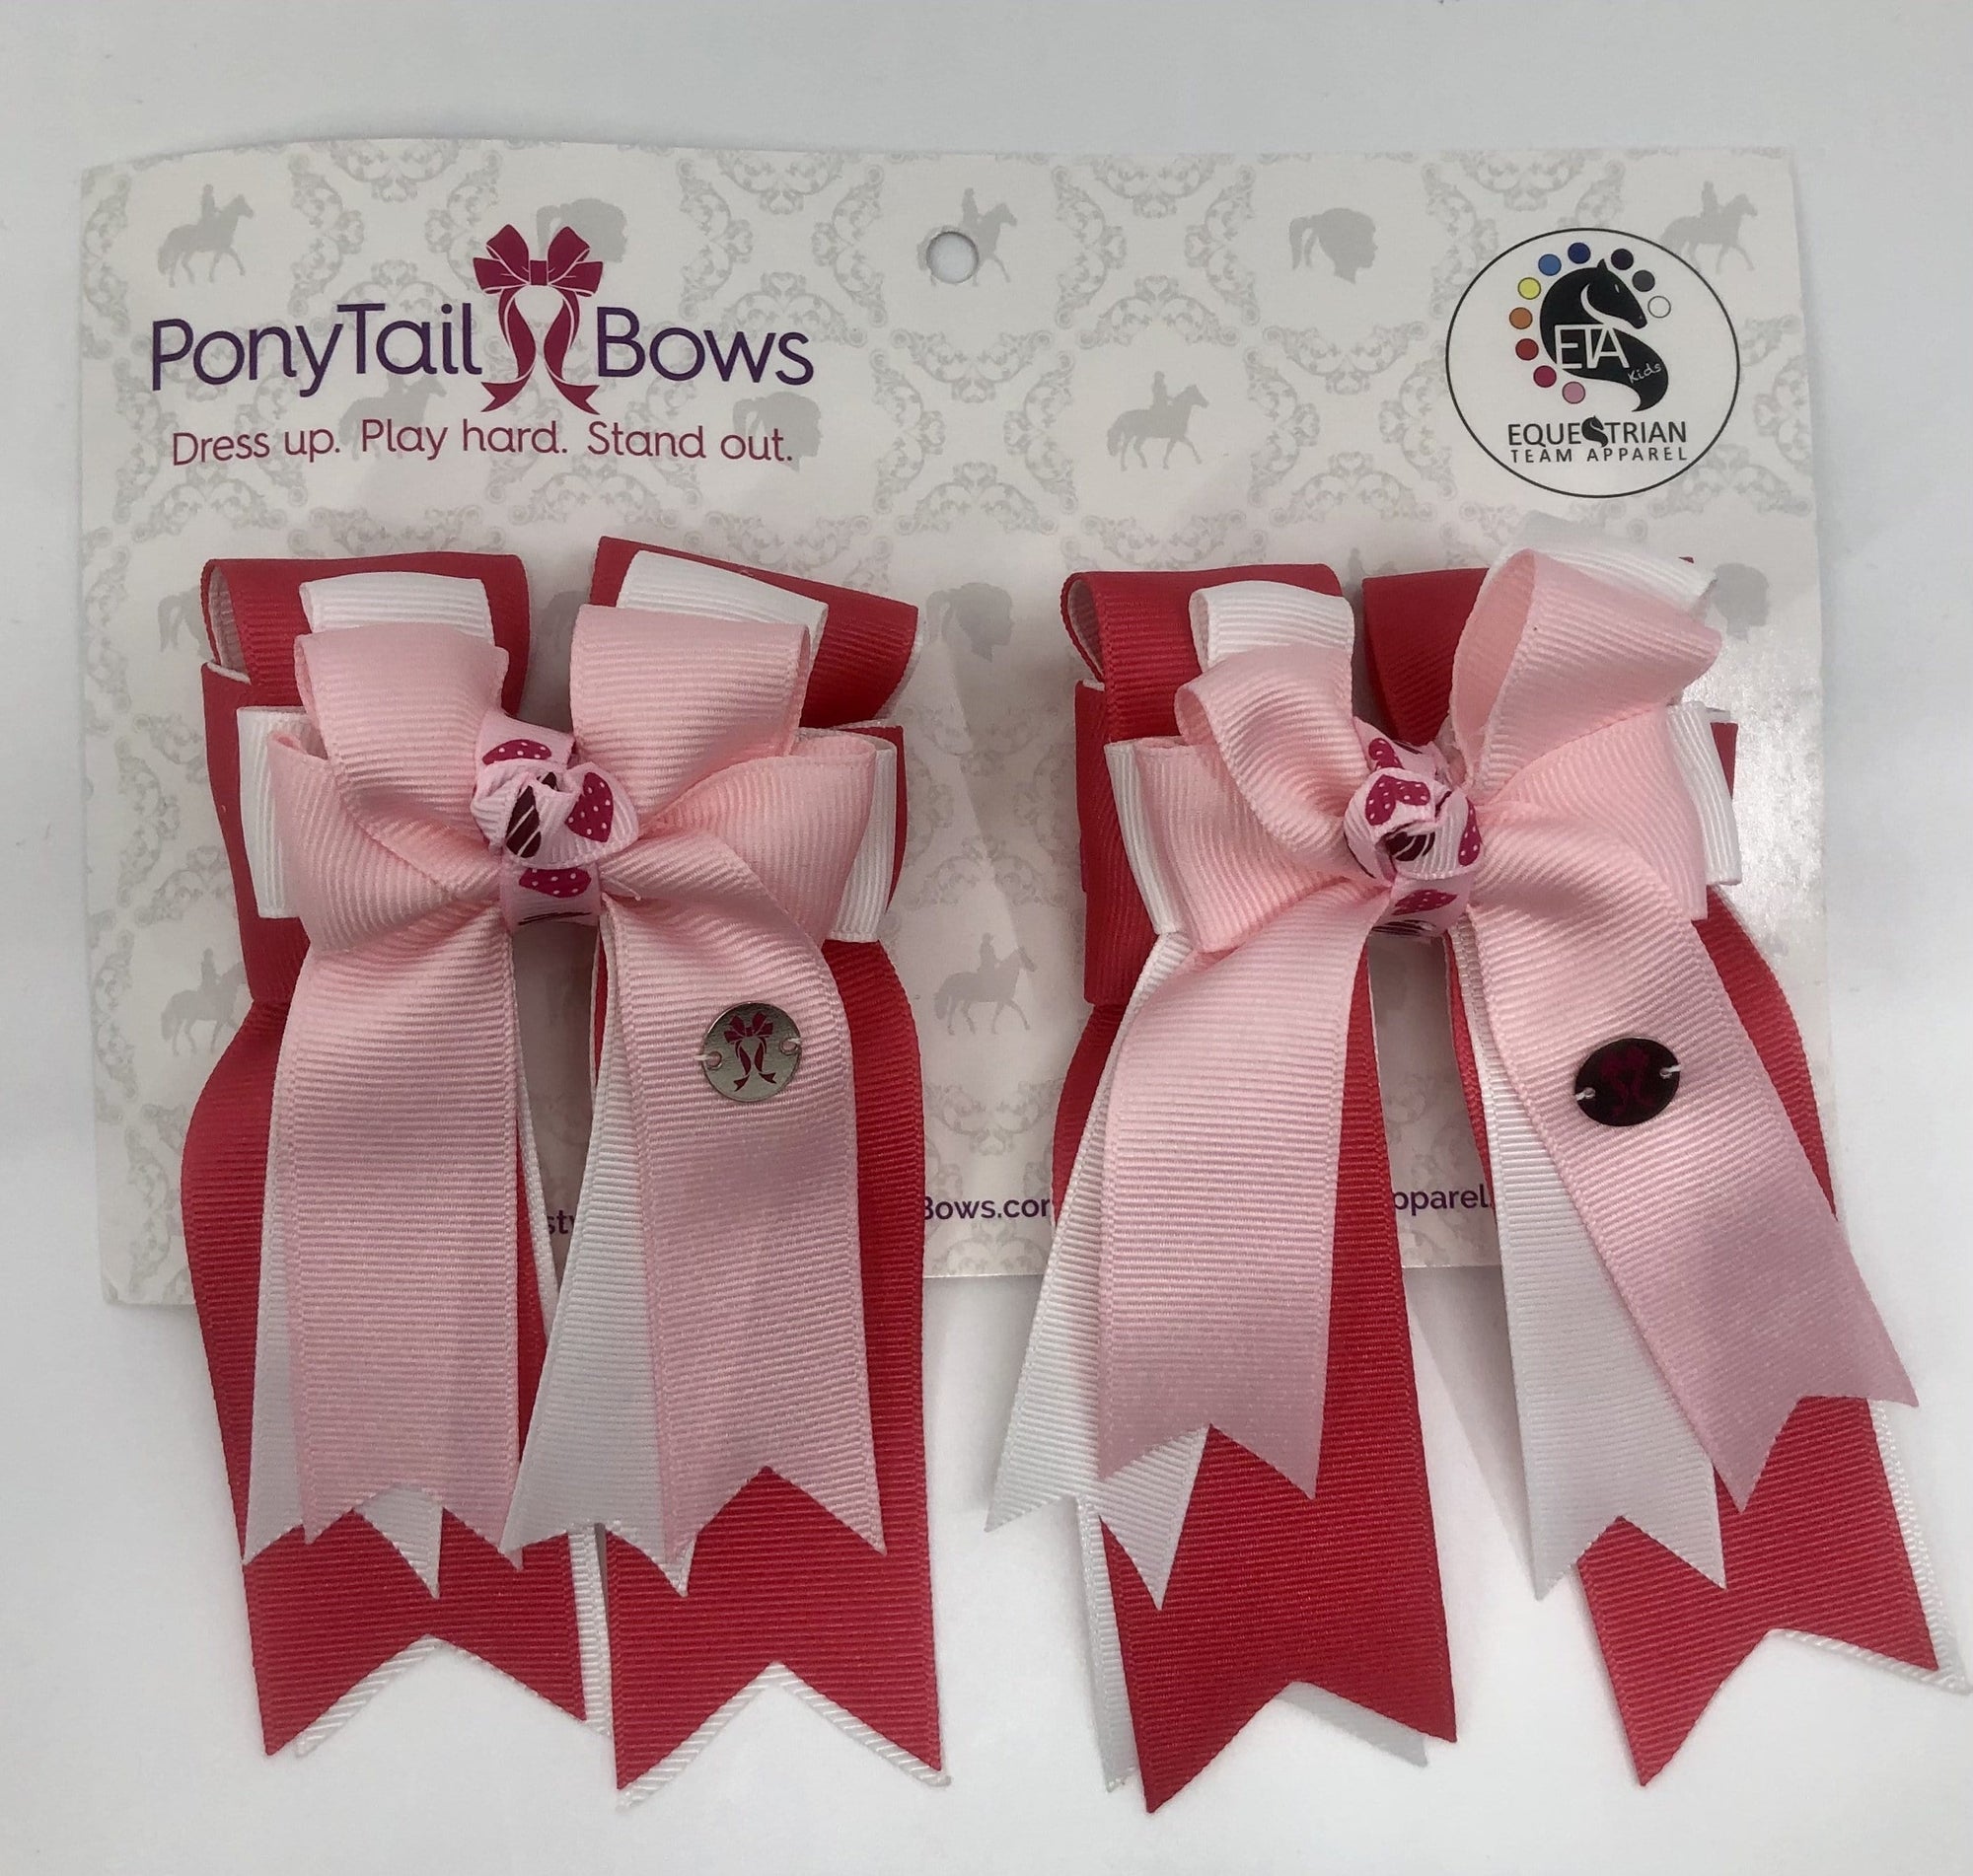 PonyTail Bows 3" Tails Hot Pink Heart Knots PonyTail Bows equestrian team apparel online tack store mobile tack store custom farm apparel custom show stable clothing equestrian lifestyle horse show clothing riding clothes PonyTail Bows | Equestrian Hair Accessories horses equestrian tack store